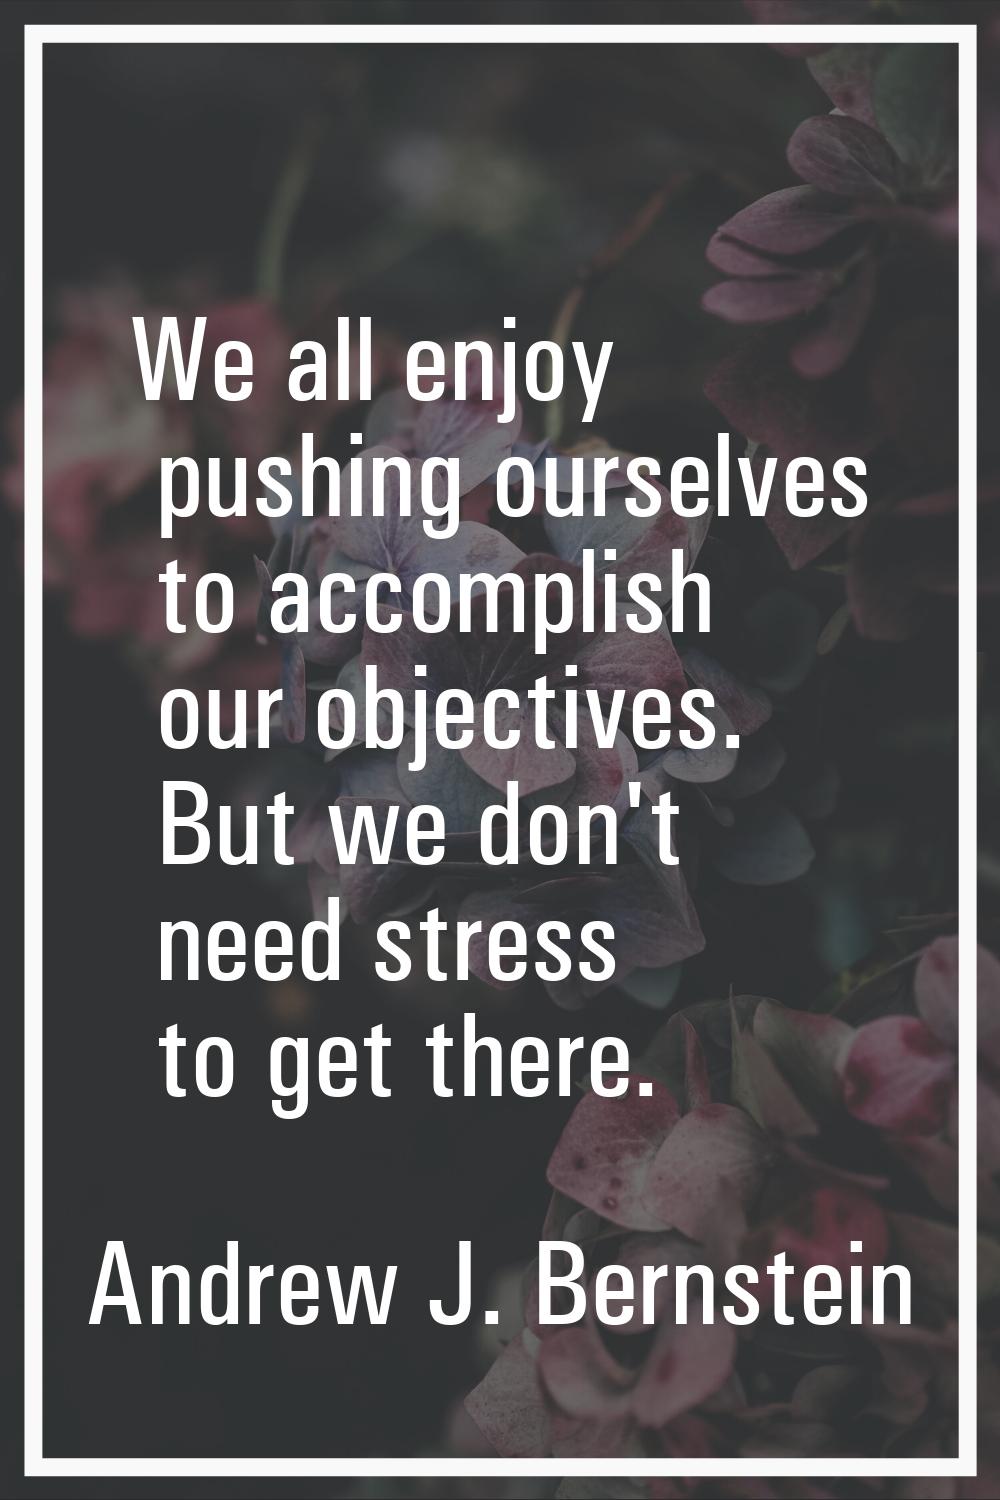 We all enjoy pushing ourselves to accomplish our objectives. But we don't need stress to get there.